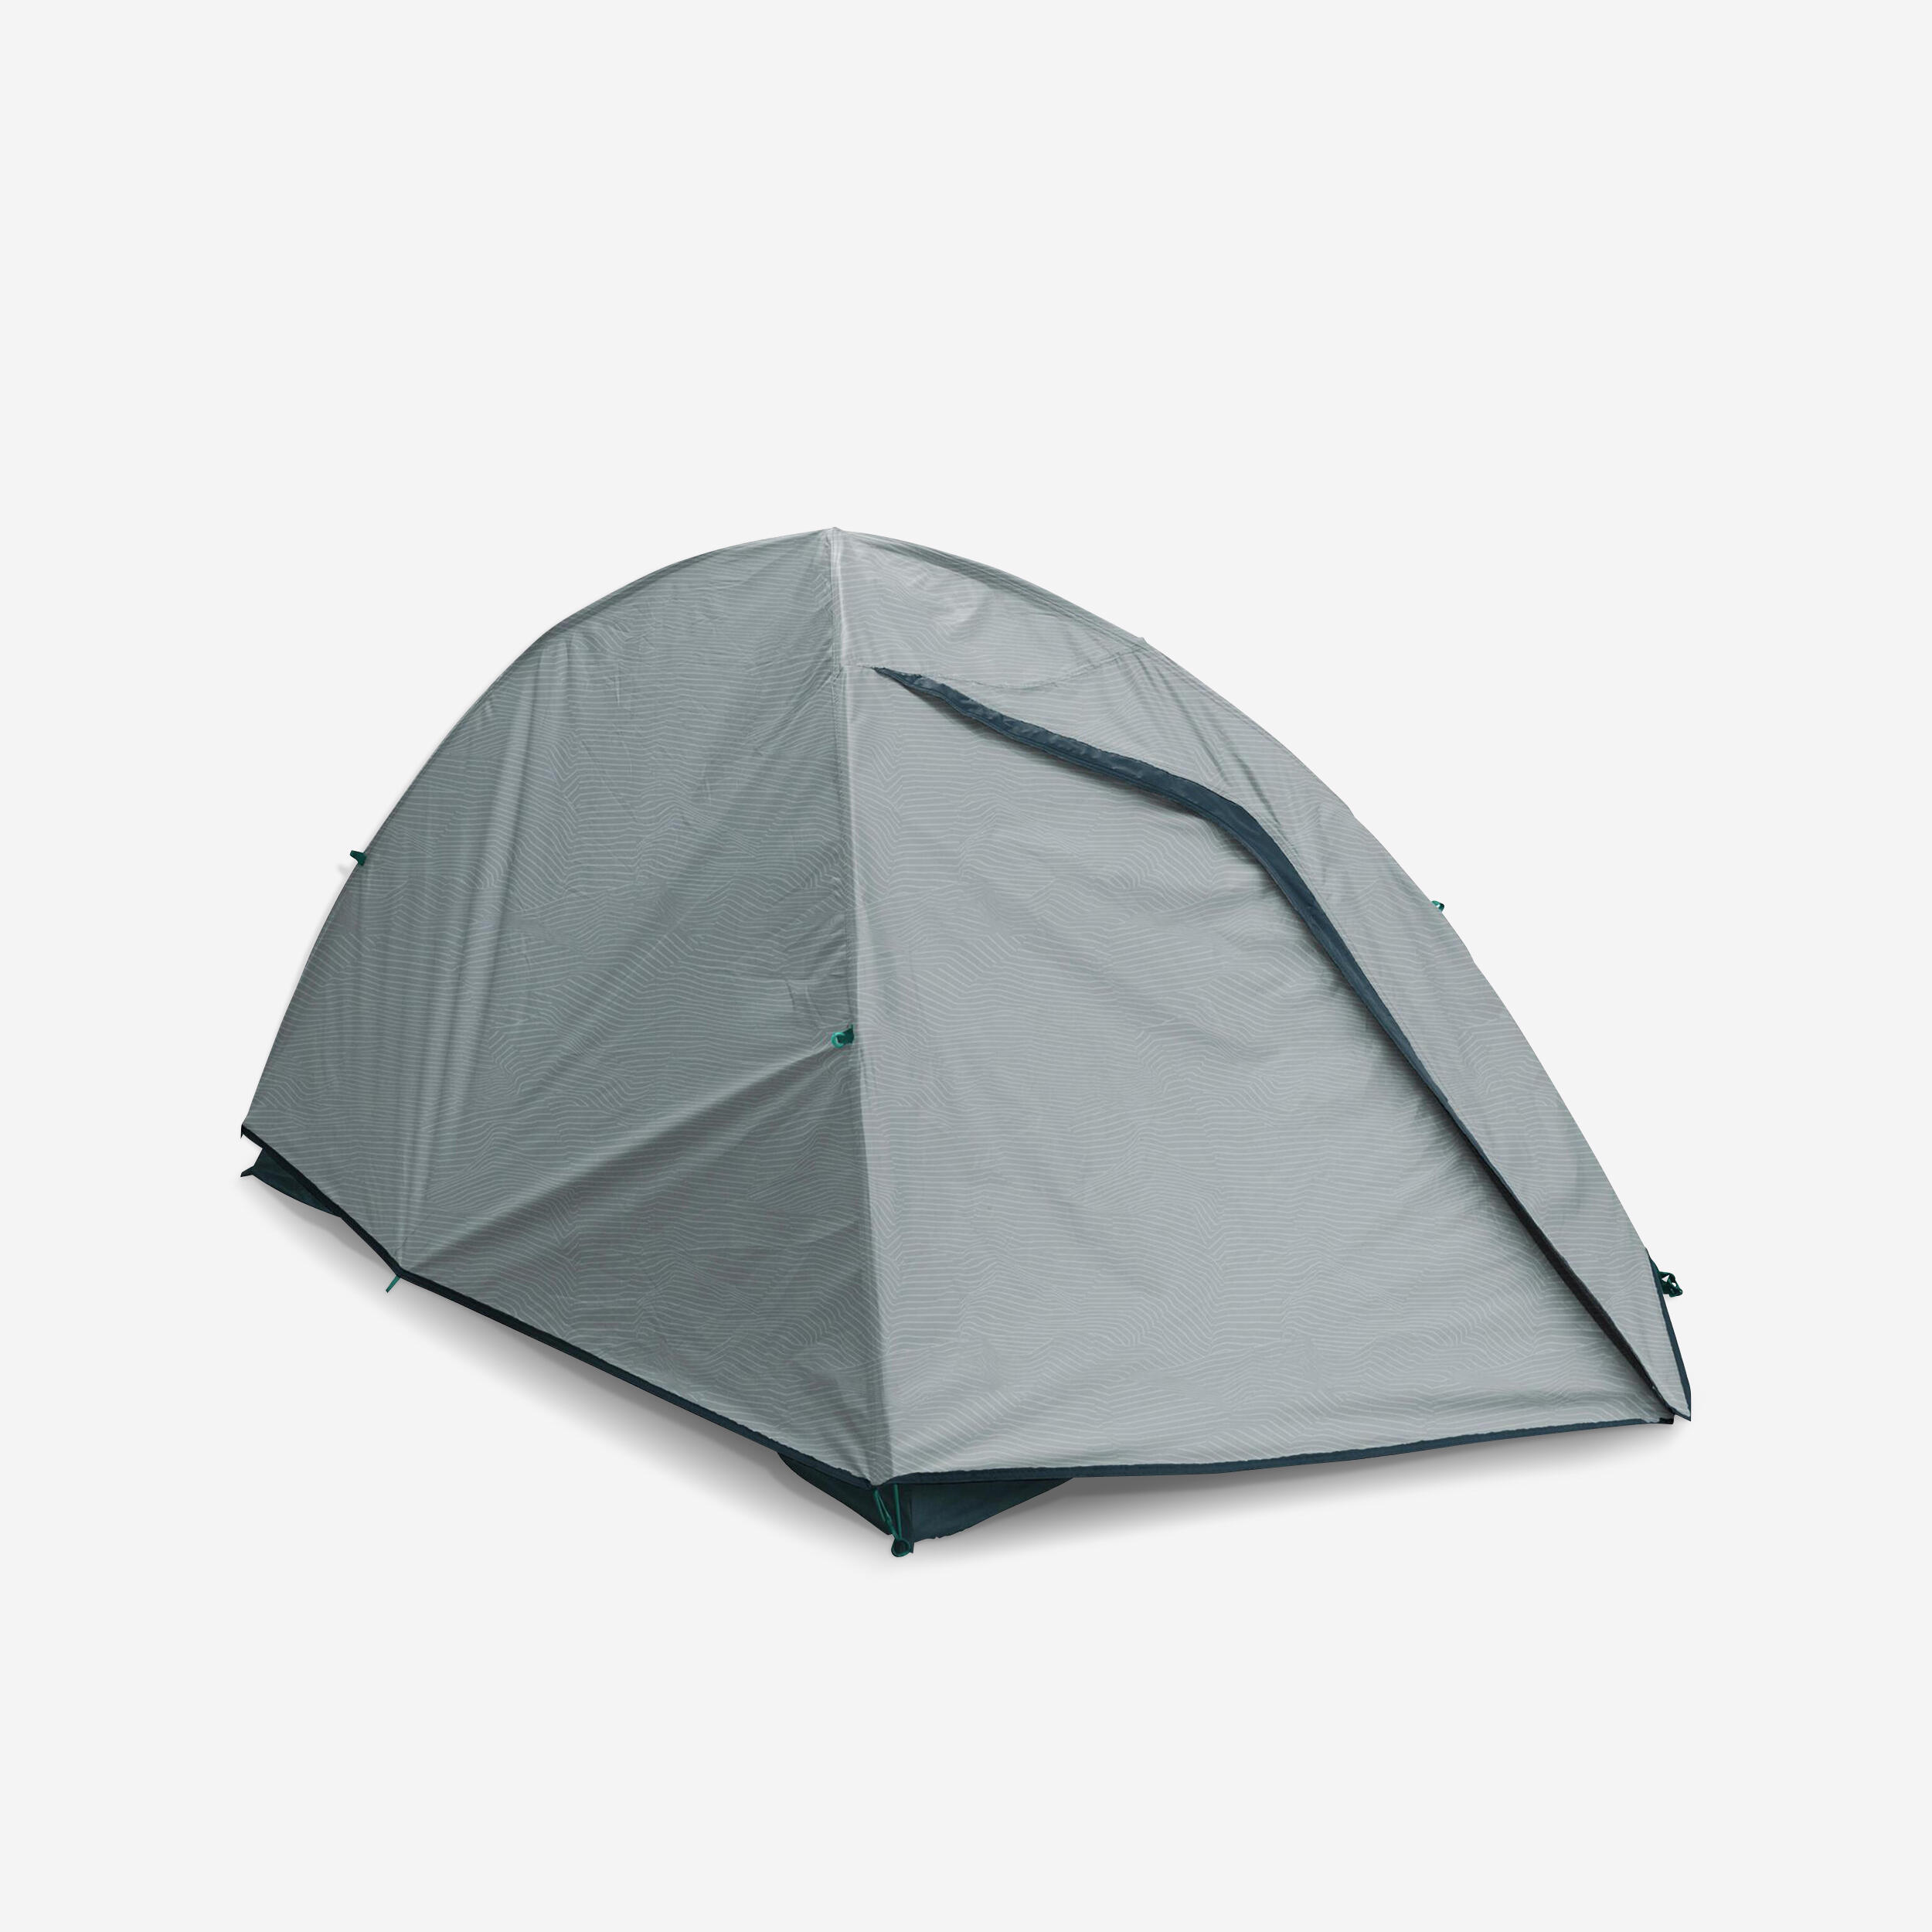 QUECHUA FLYSHEET - SPARE PART FOR THE MH100 2 PERSON TENT